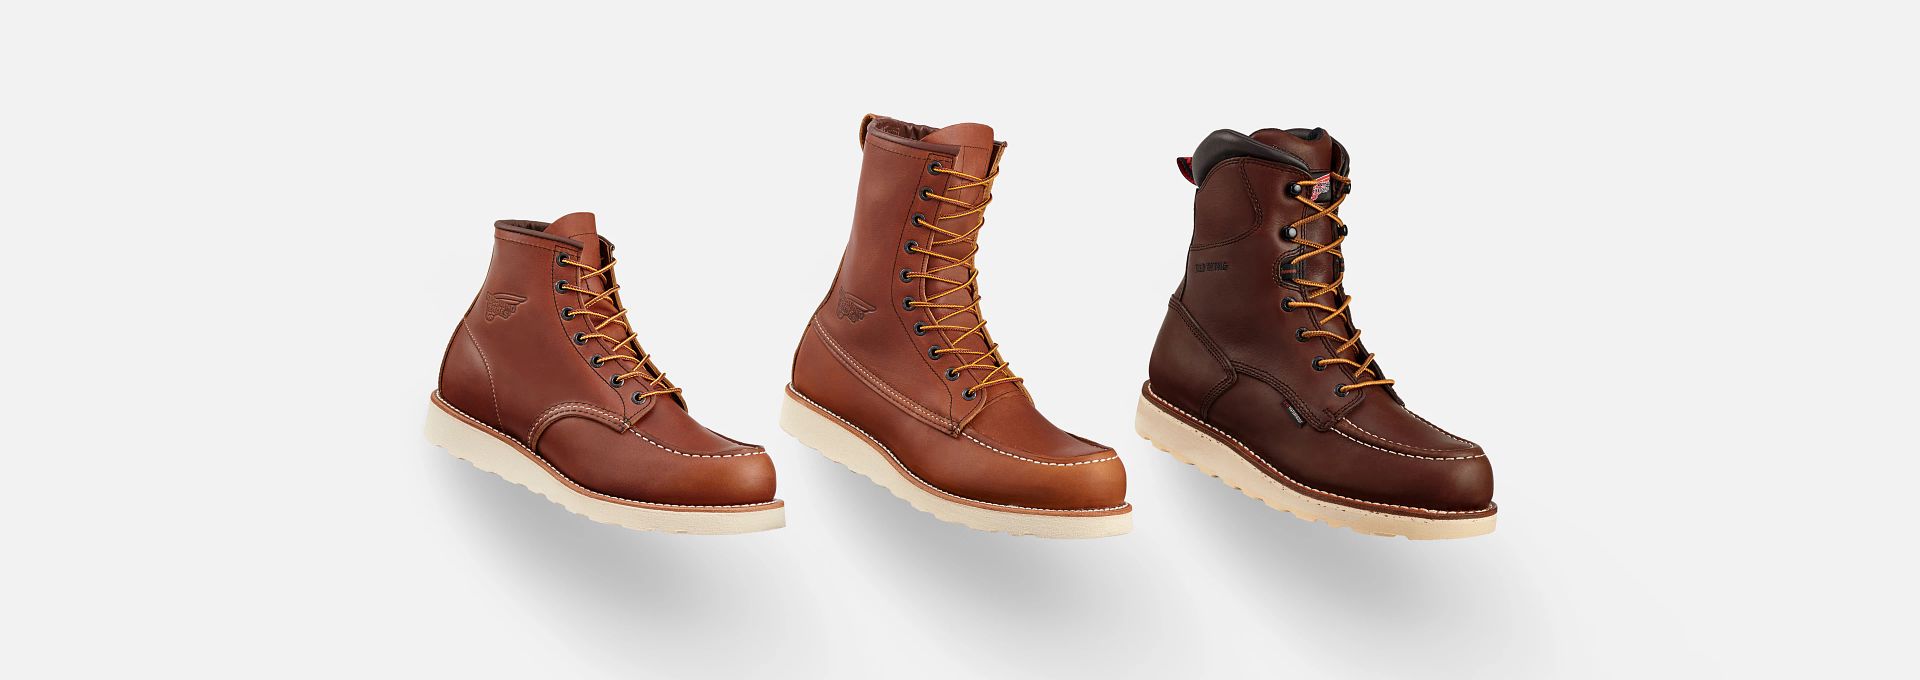 Traction Tred | Red Wing